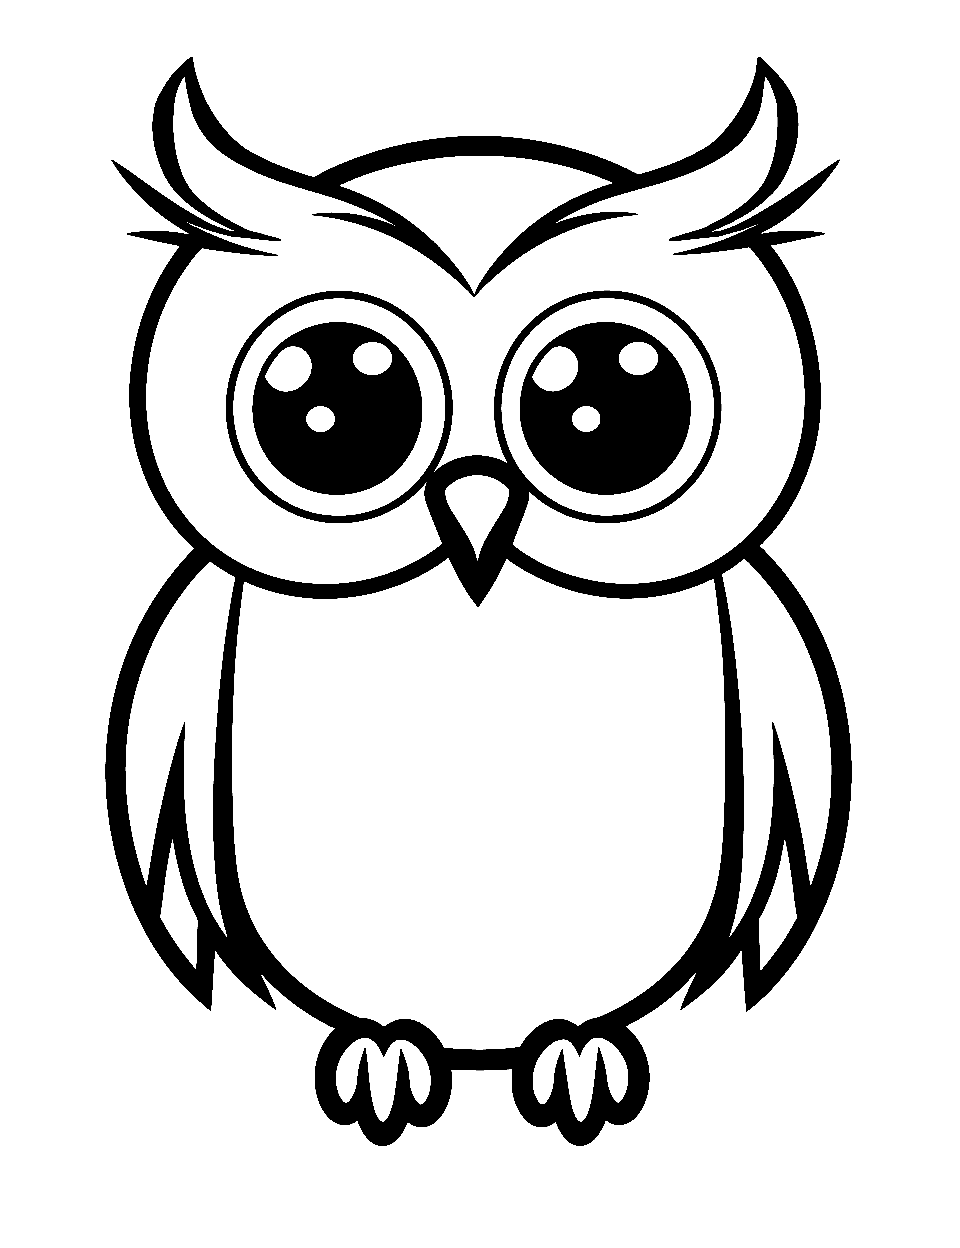 Kawaii Owl with Big Eyes Coloring Page - A super cute, cartoon-style owl with oversized eyes and a cheerful expression.